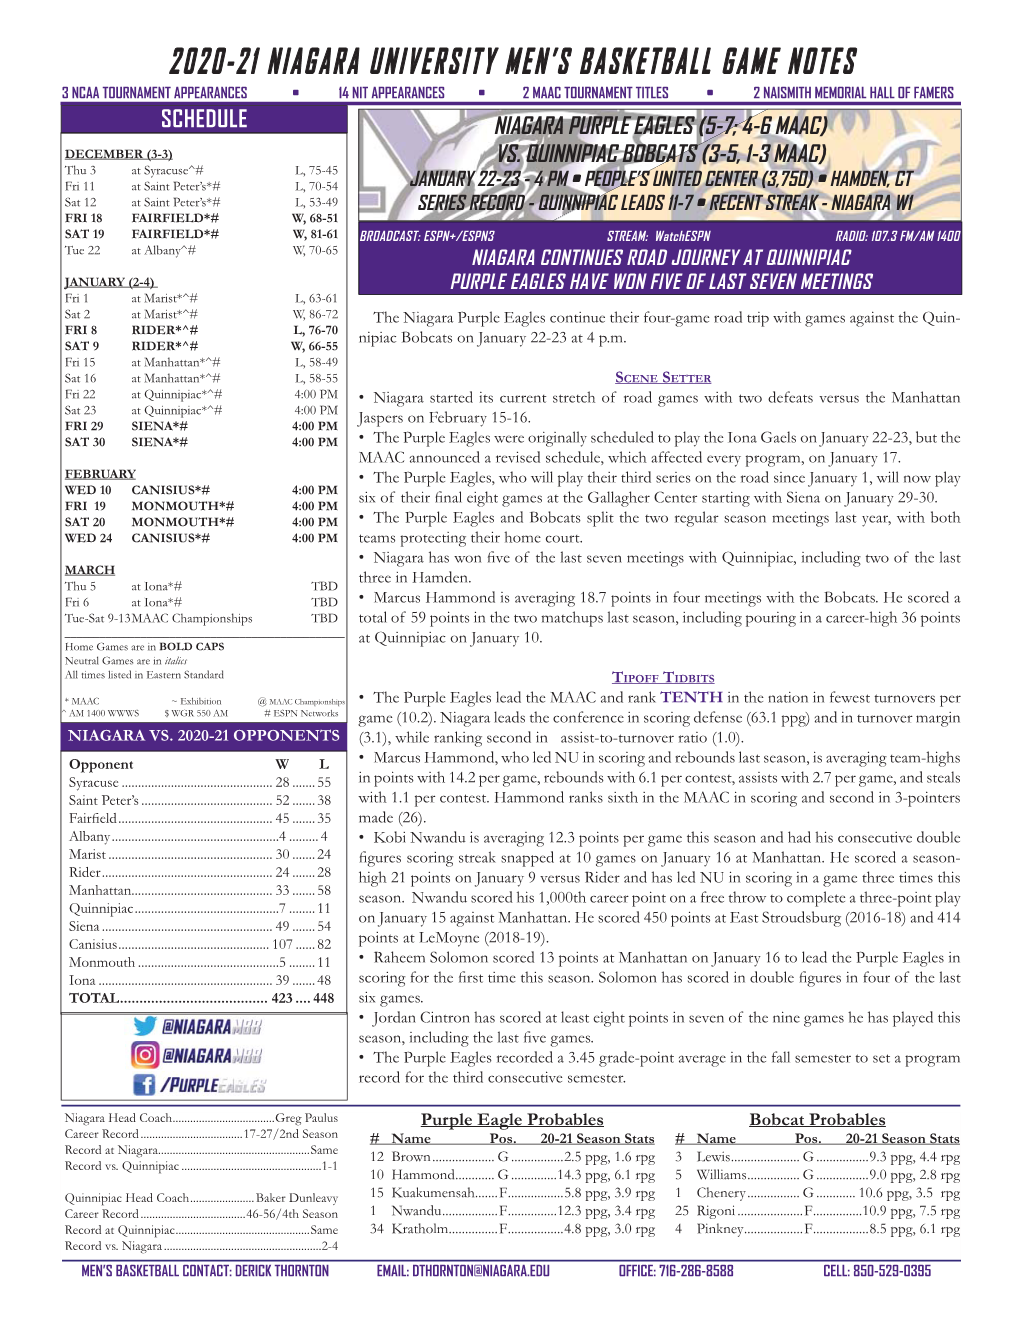 Game 13-14 Notes